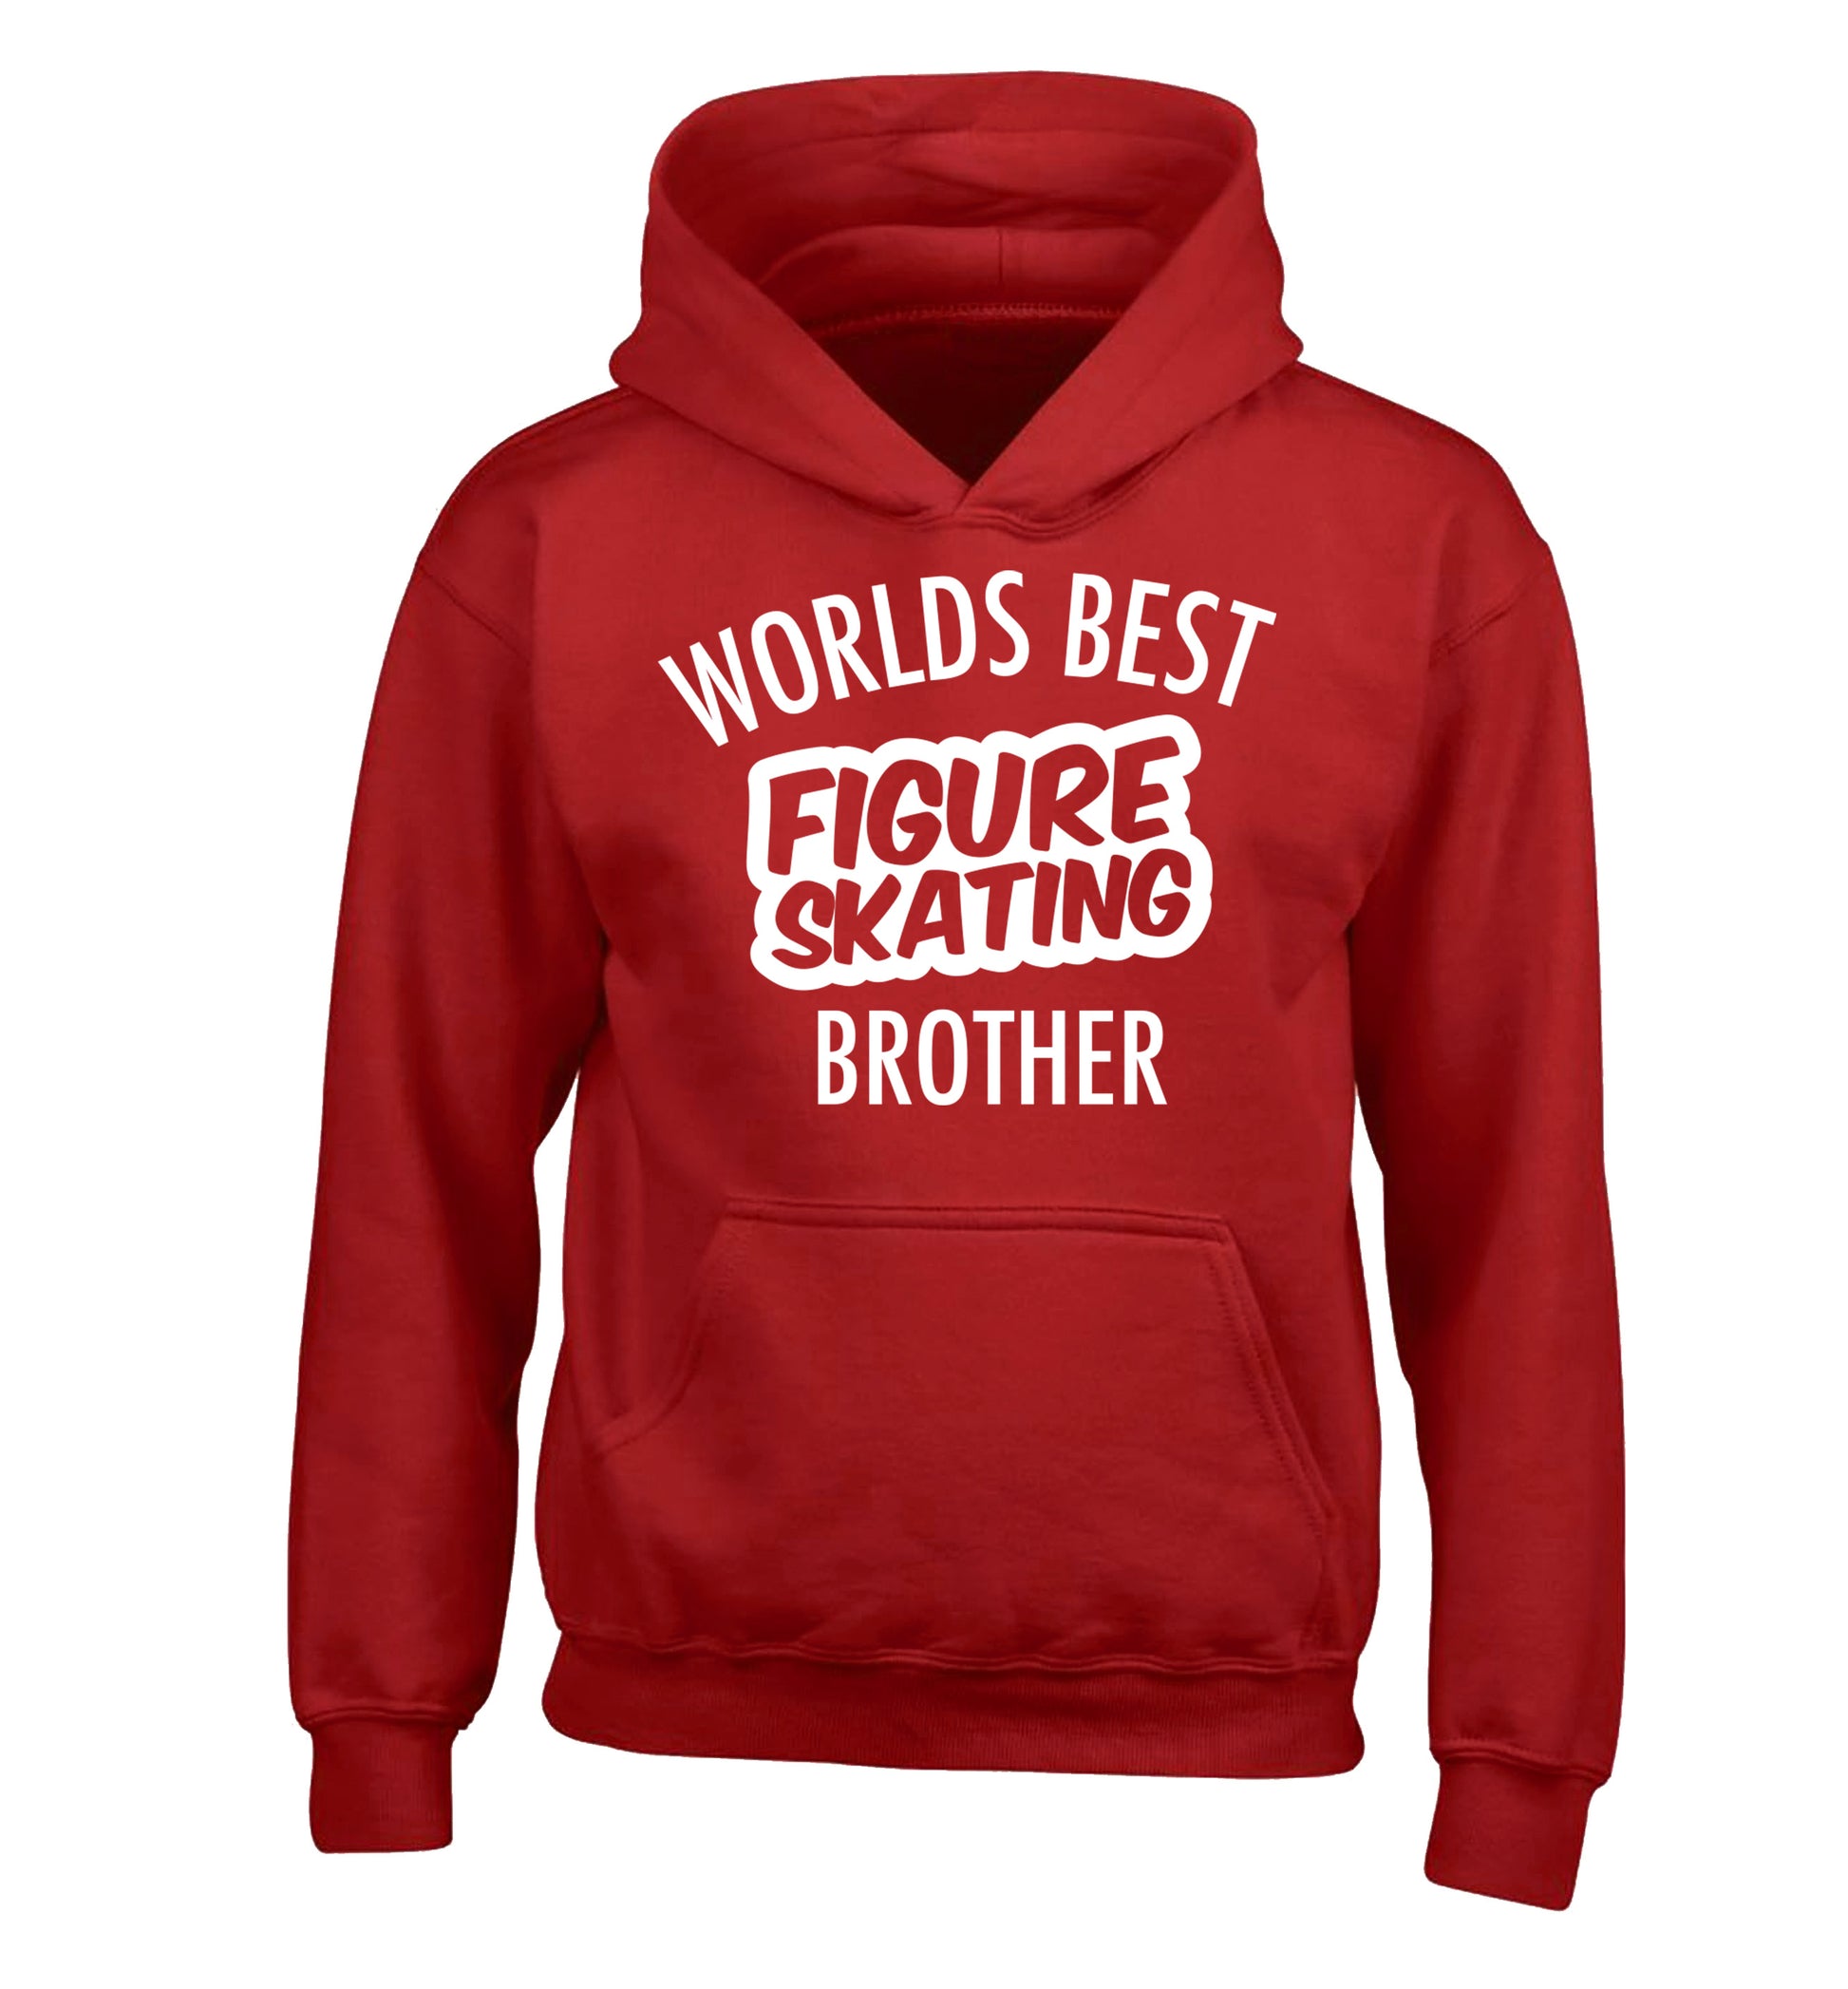 Worlds best figure skating brother children's red hoodie 12-14 Years